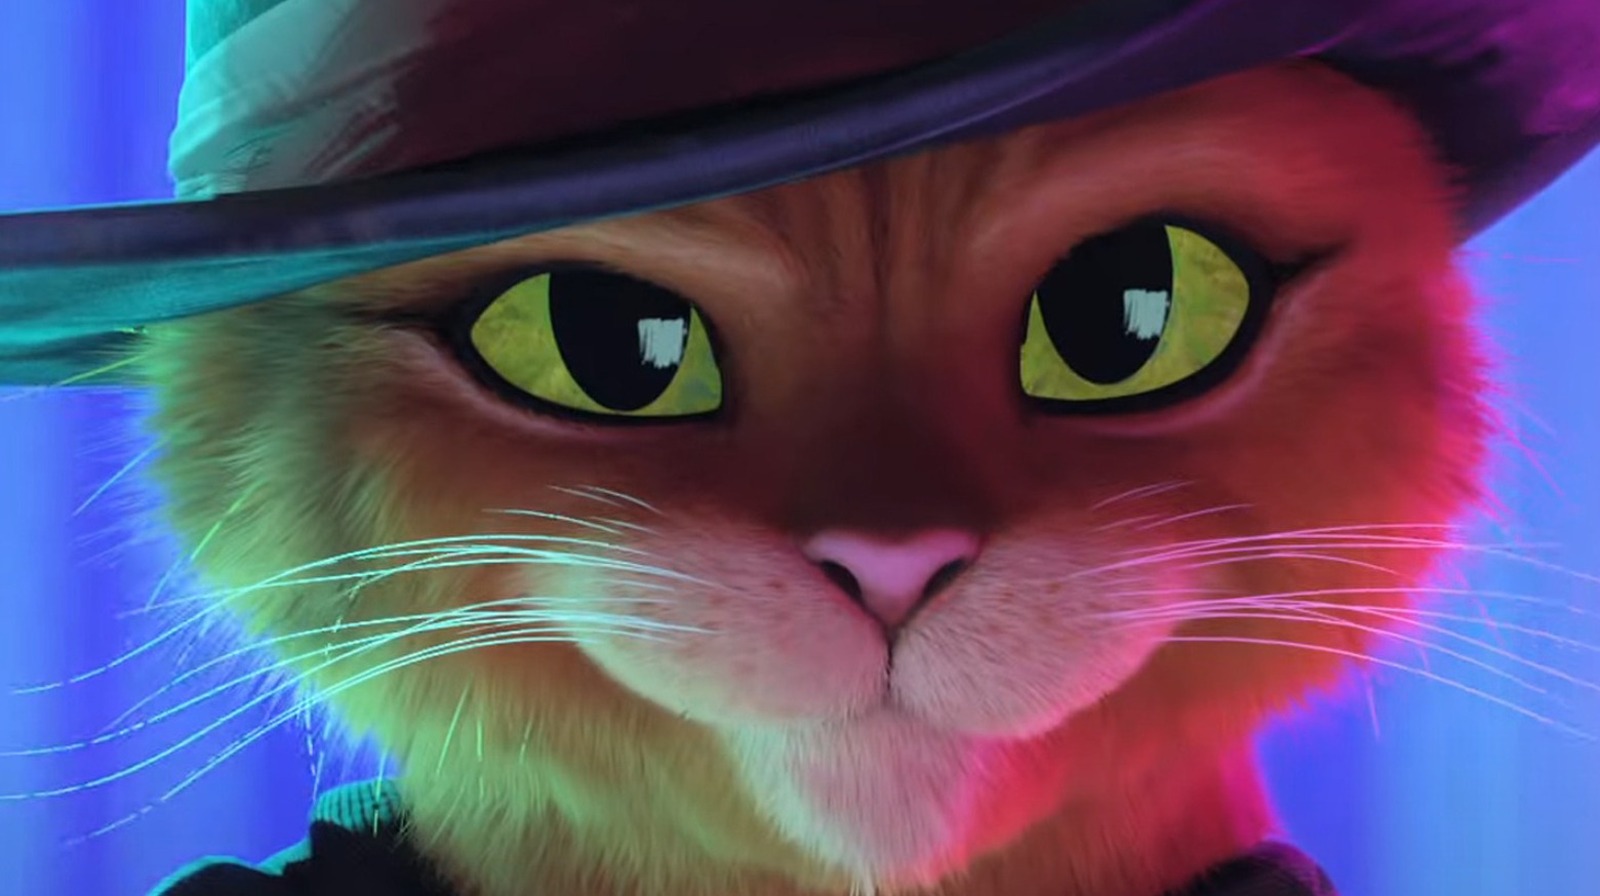 Puss in Boots: The Last Wish': Voices Behind Each Animated Character – The  Hollywood Reporter